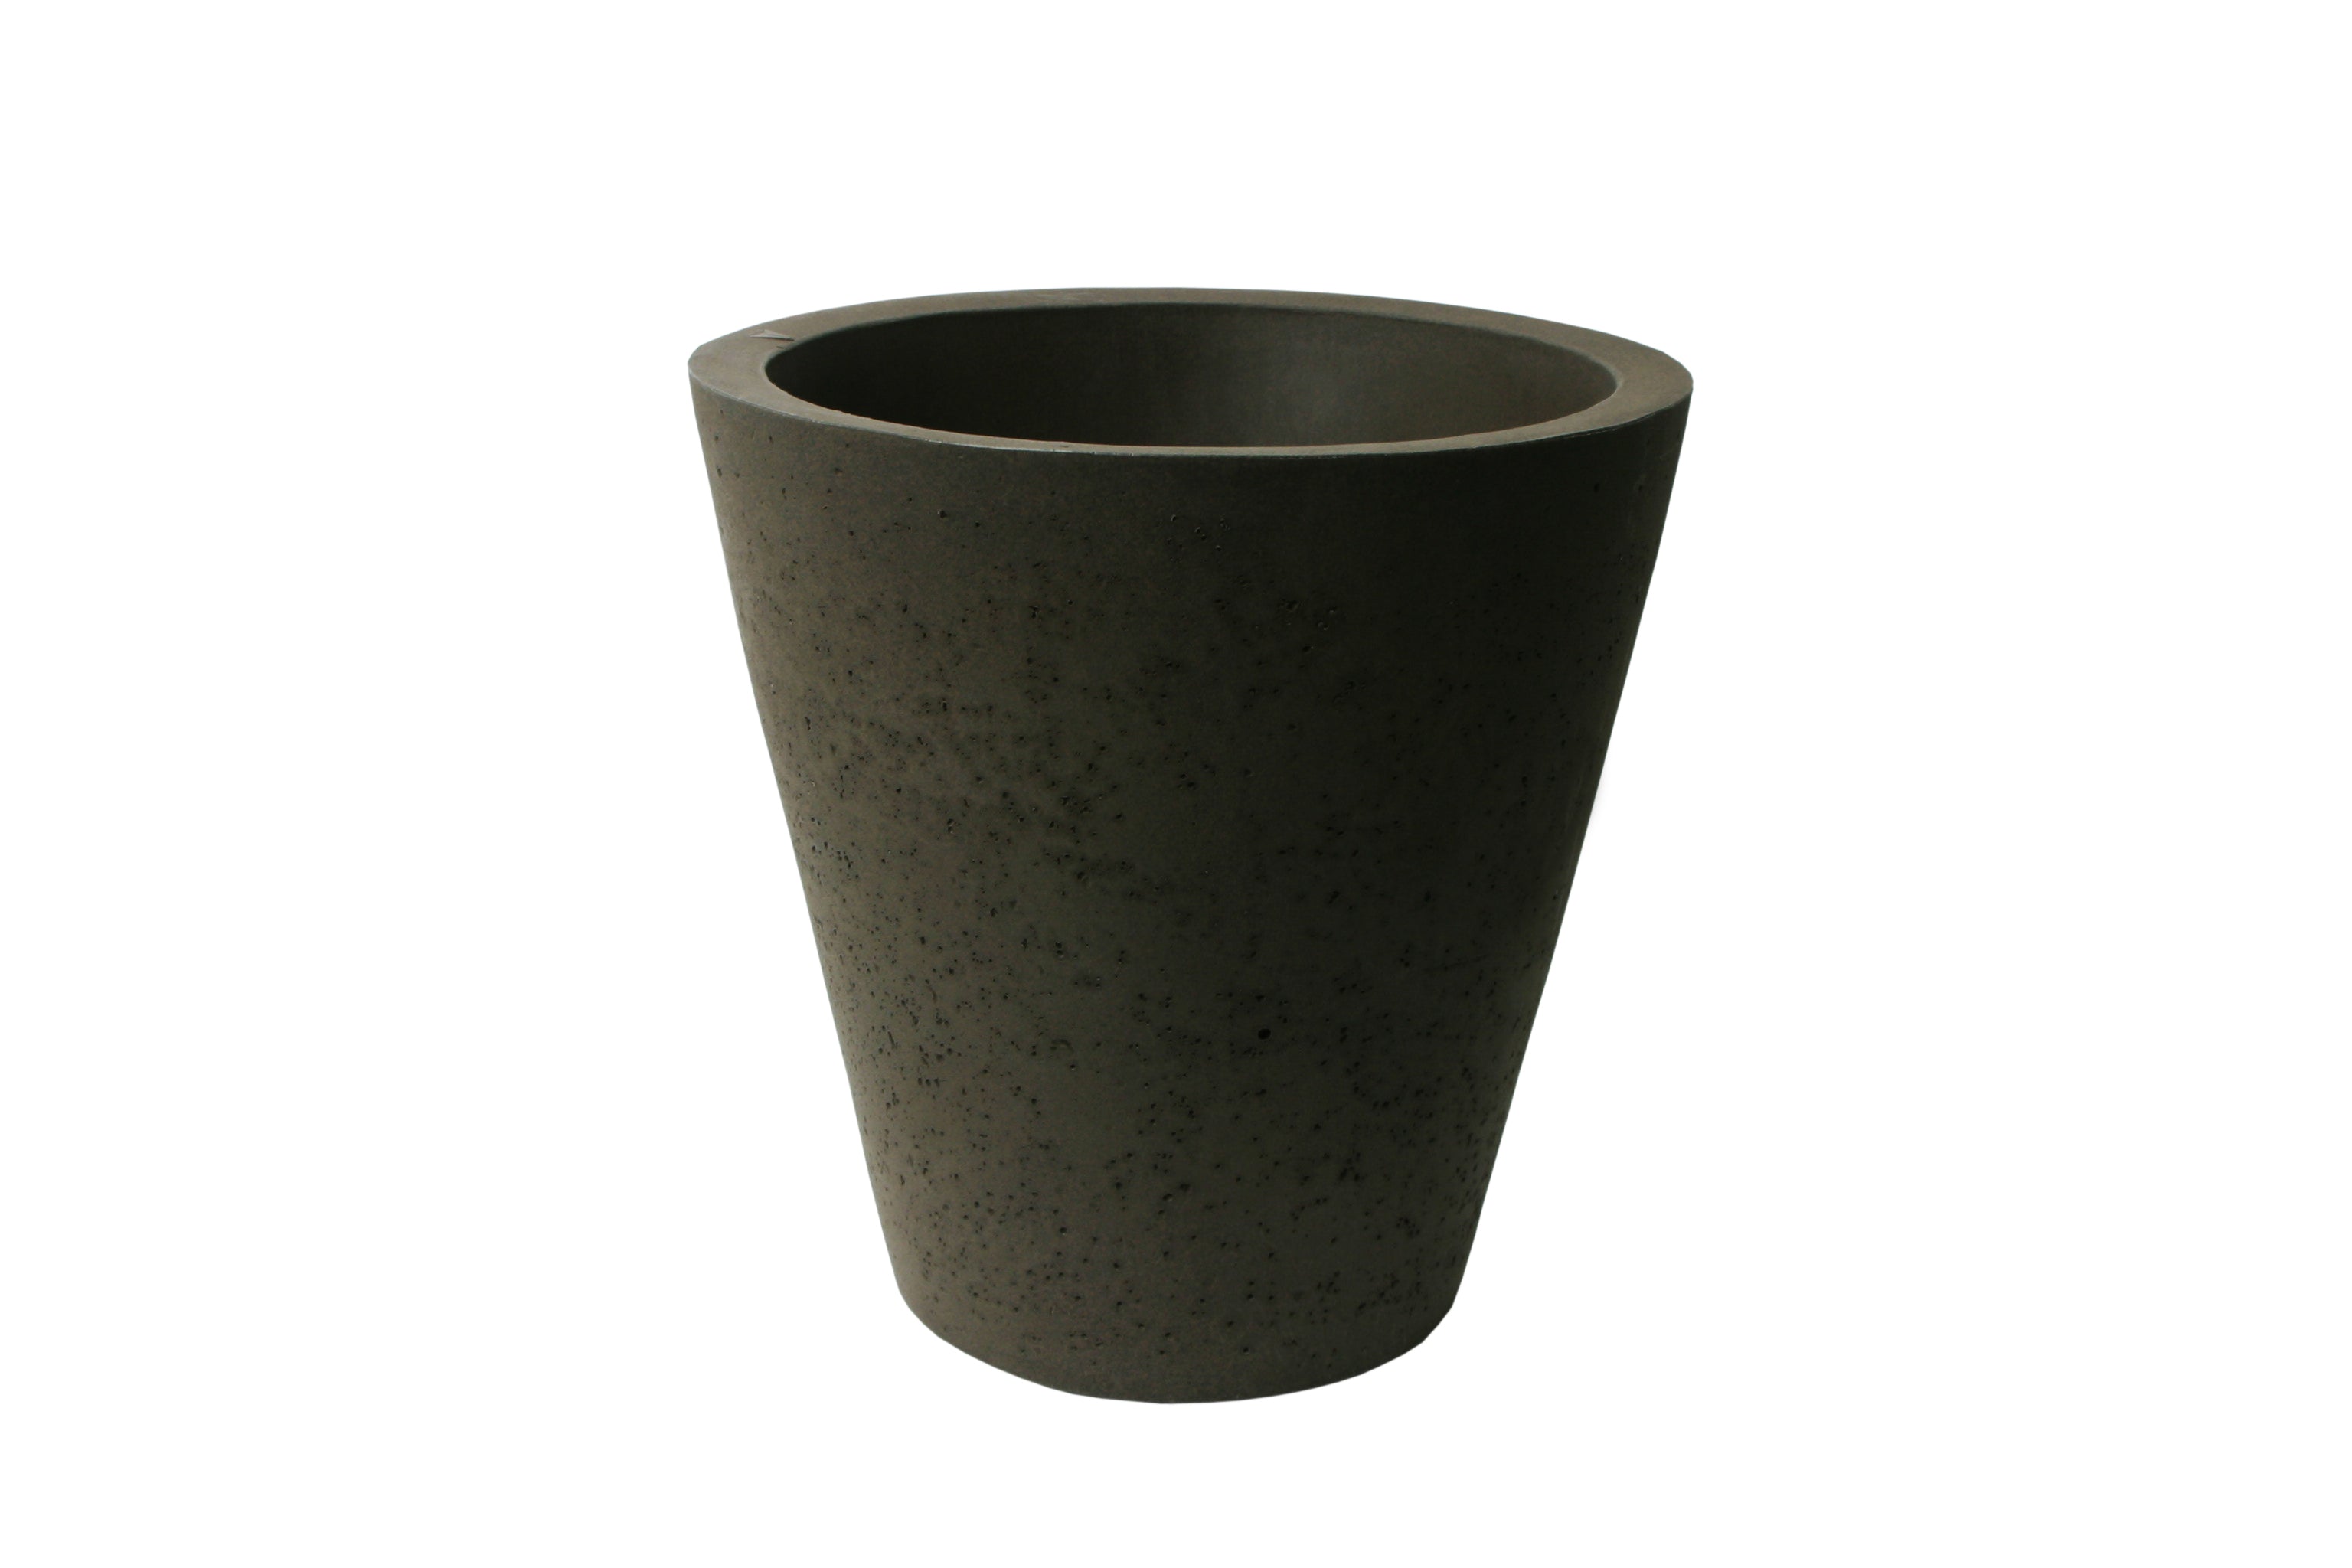 Algreen Crete Planter, Self-Watering Planter, 16.5-In. Height by 16-In., Concrete Texture, Brownstone